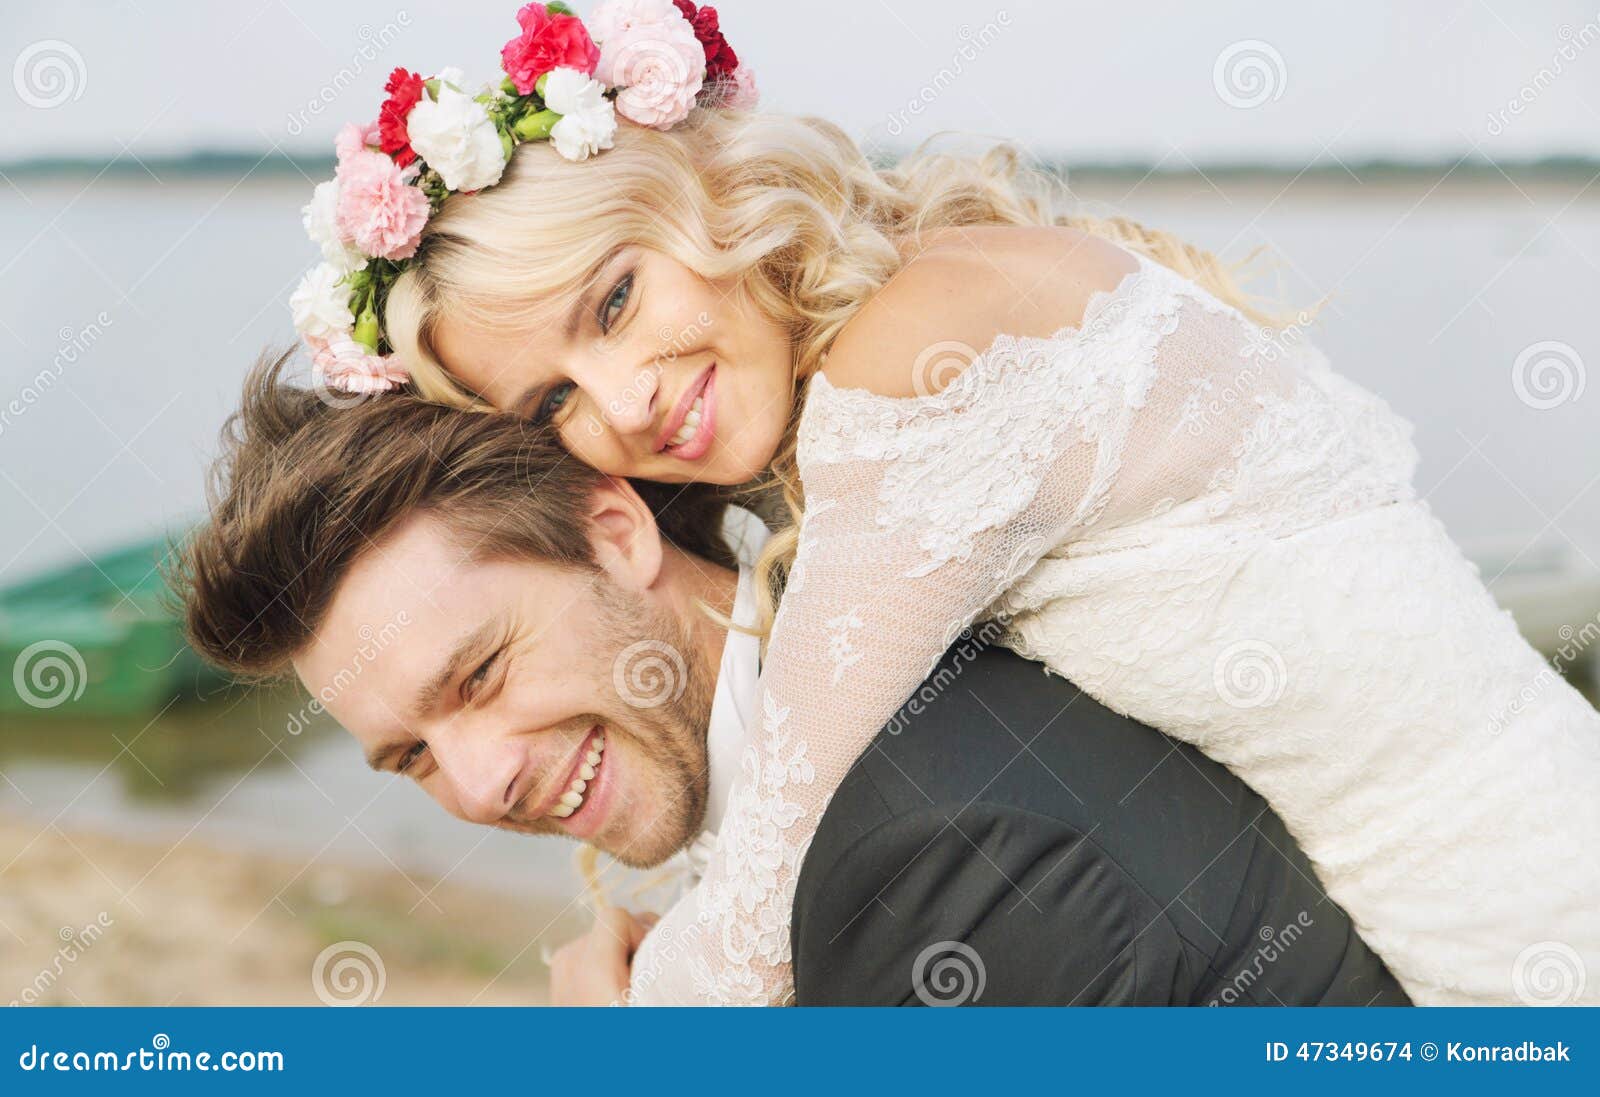 happy relaxed marriage couple hugging